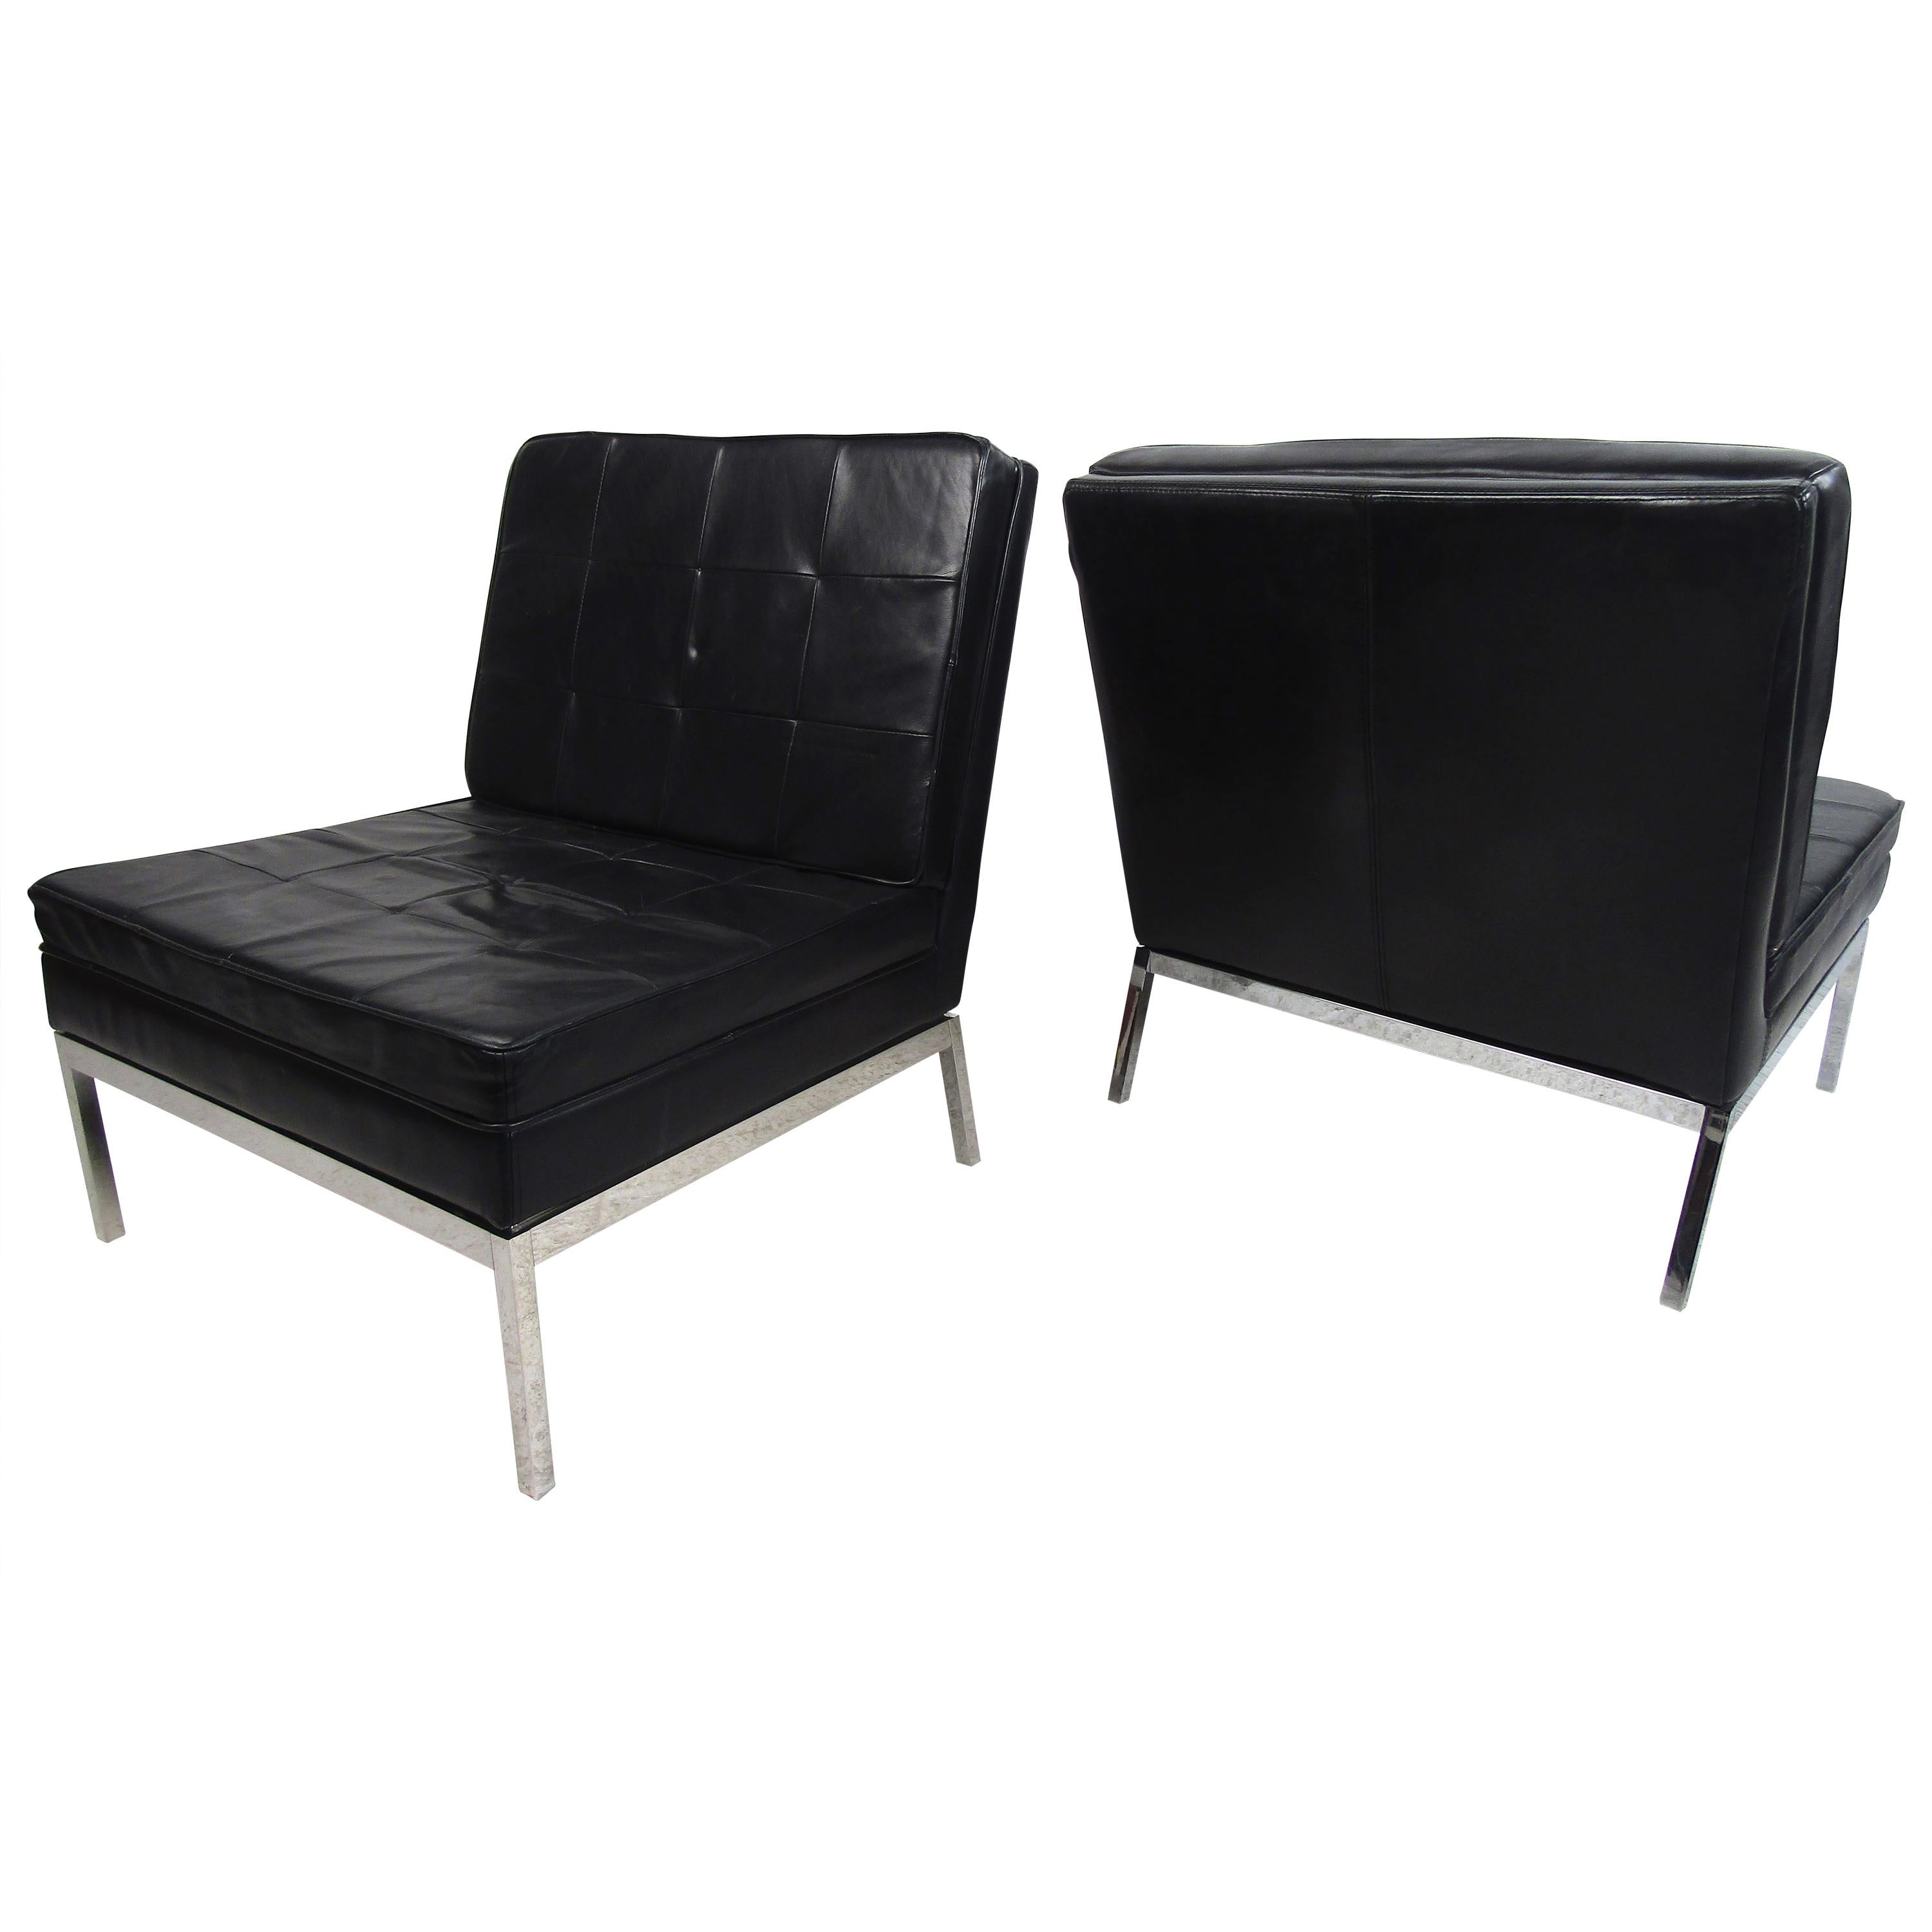 Pair of Mid-Century Modern Leather Slipper Lounge Chairs by Knoll